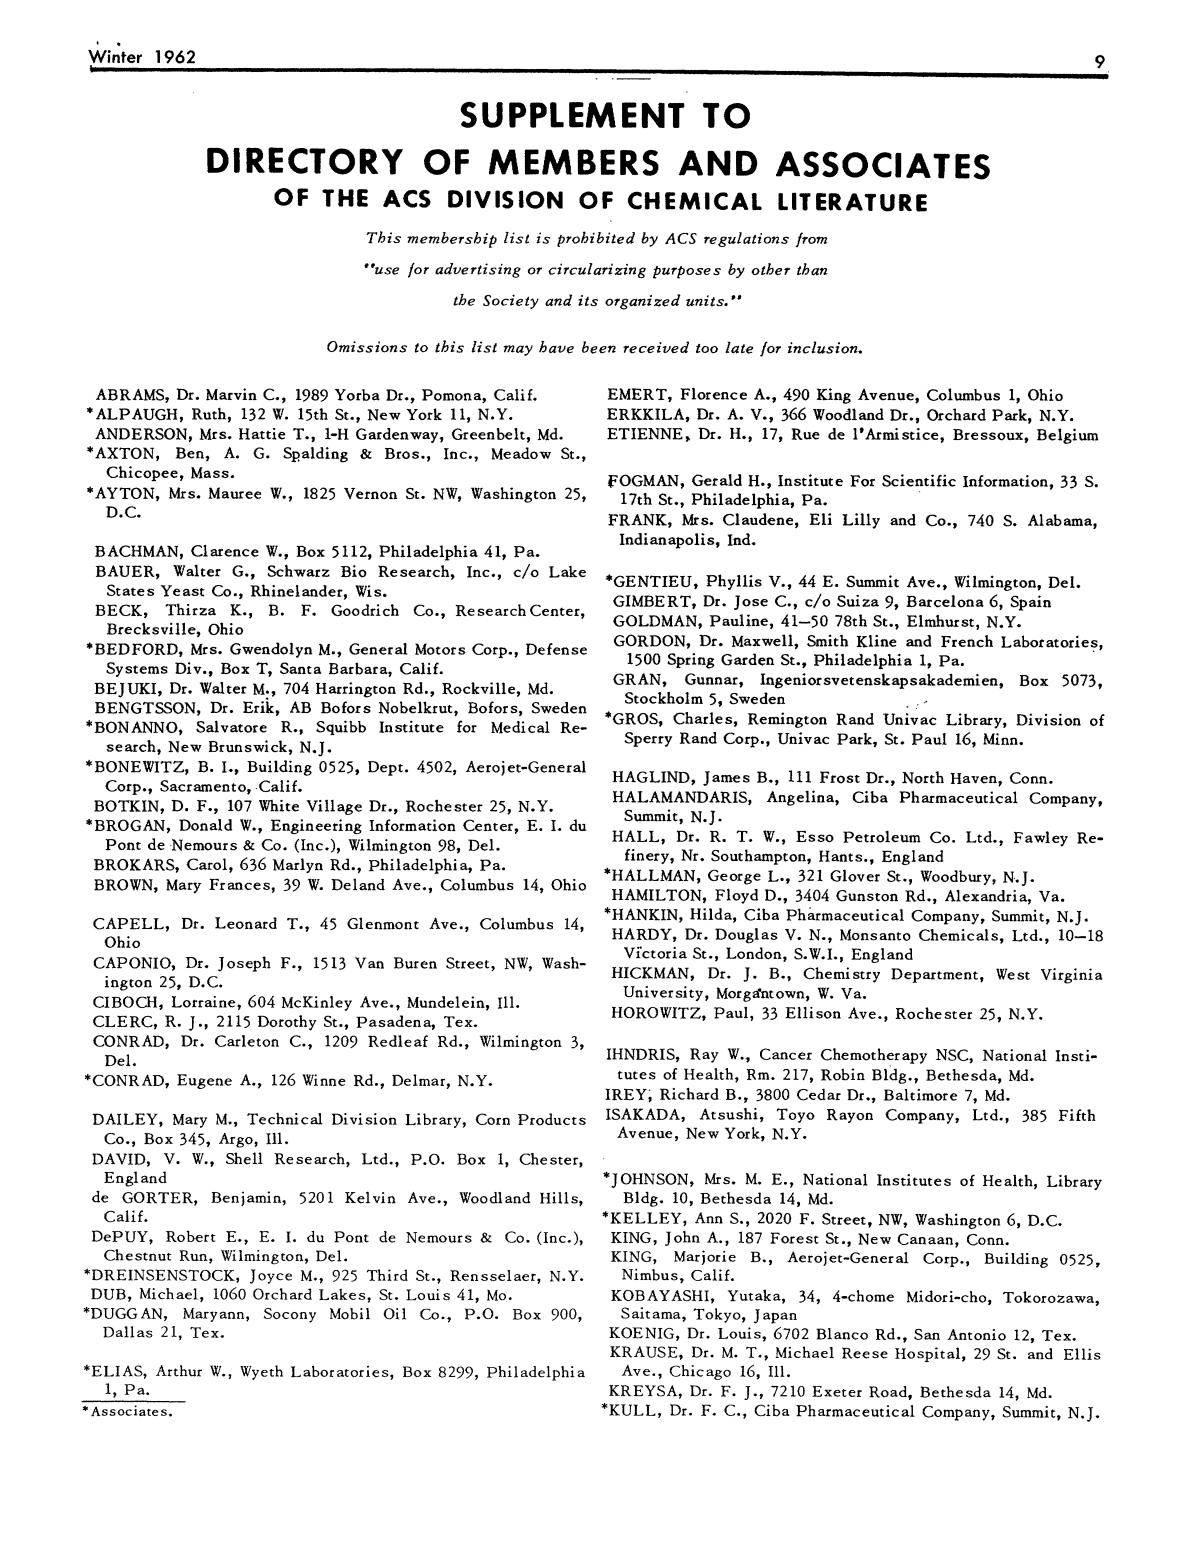 Chemical Literature Volume 14 Number 4 Winter 1962 Page 9 Unt Digital Library